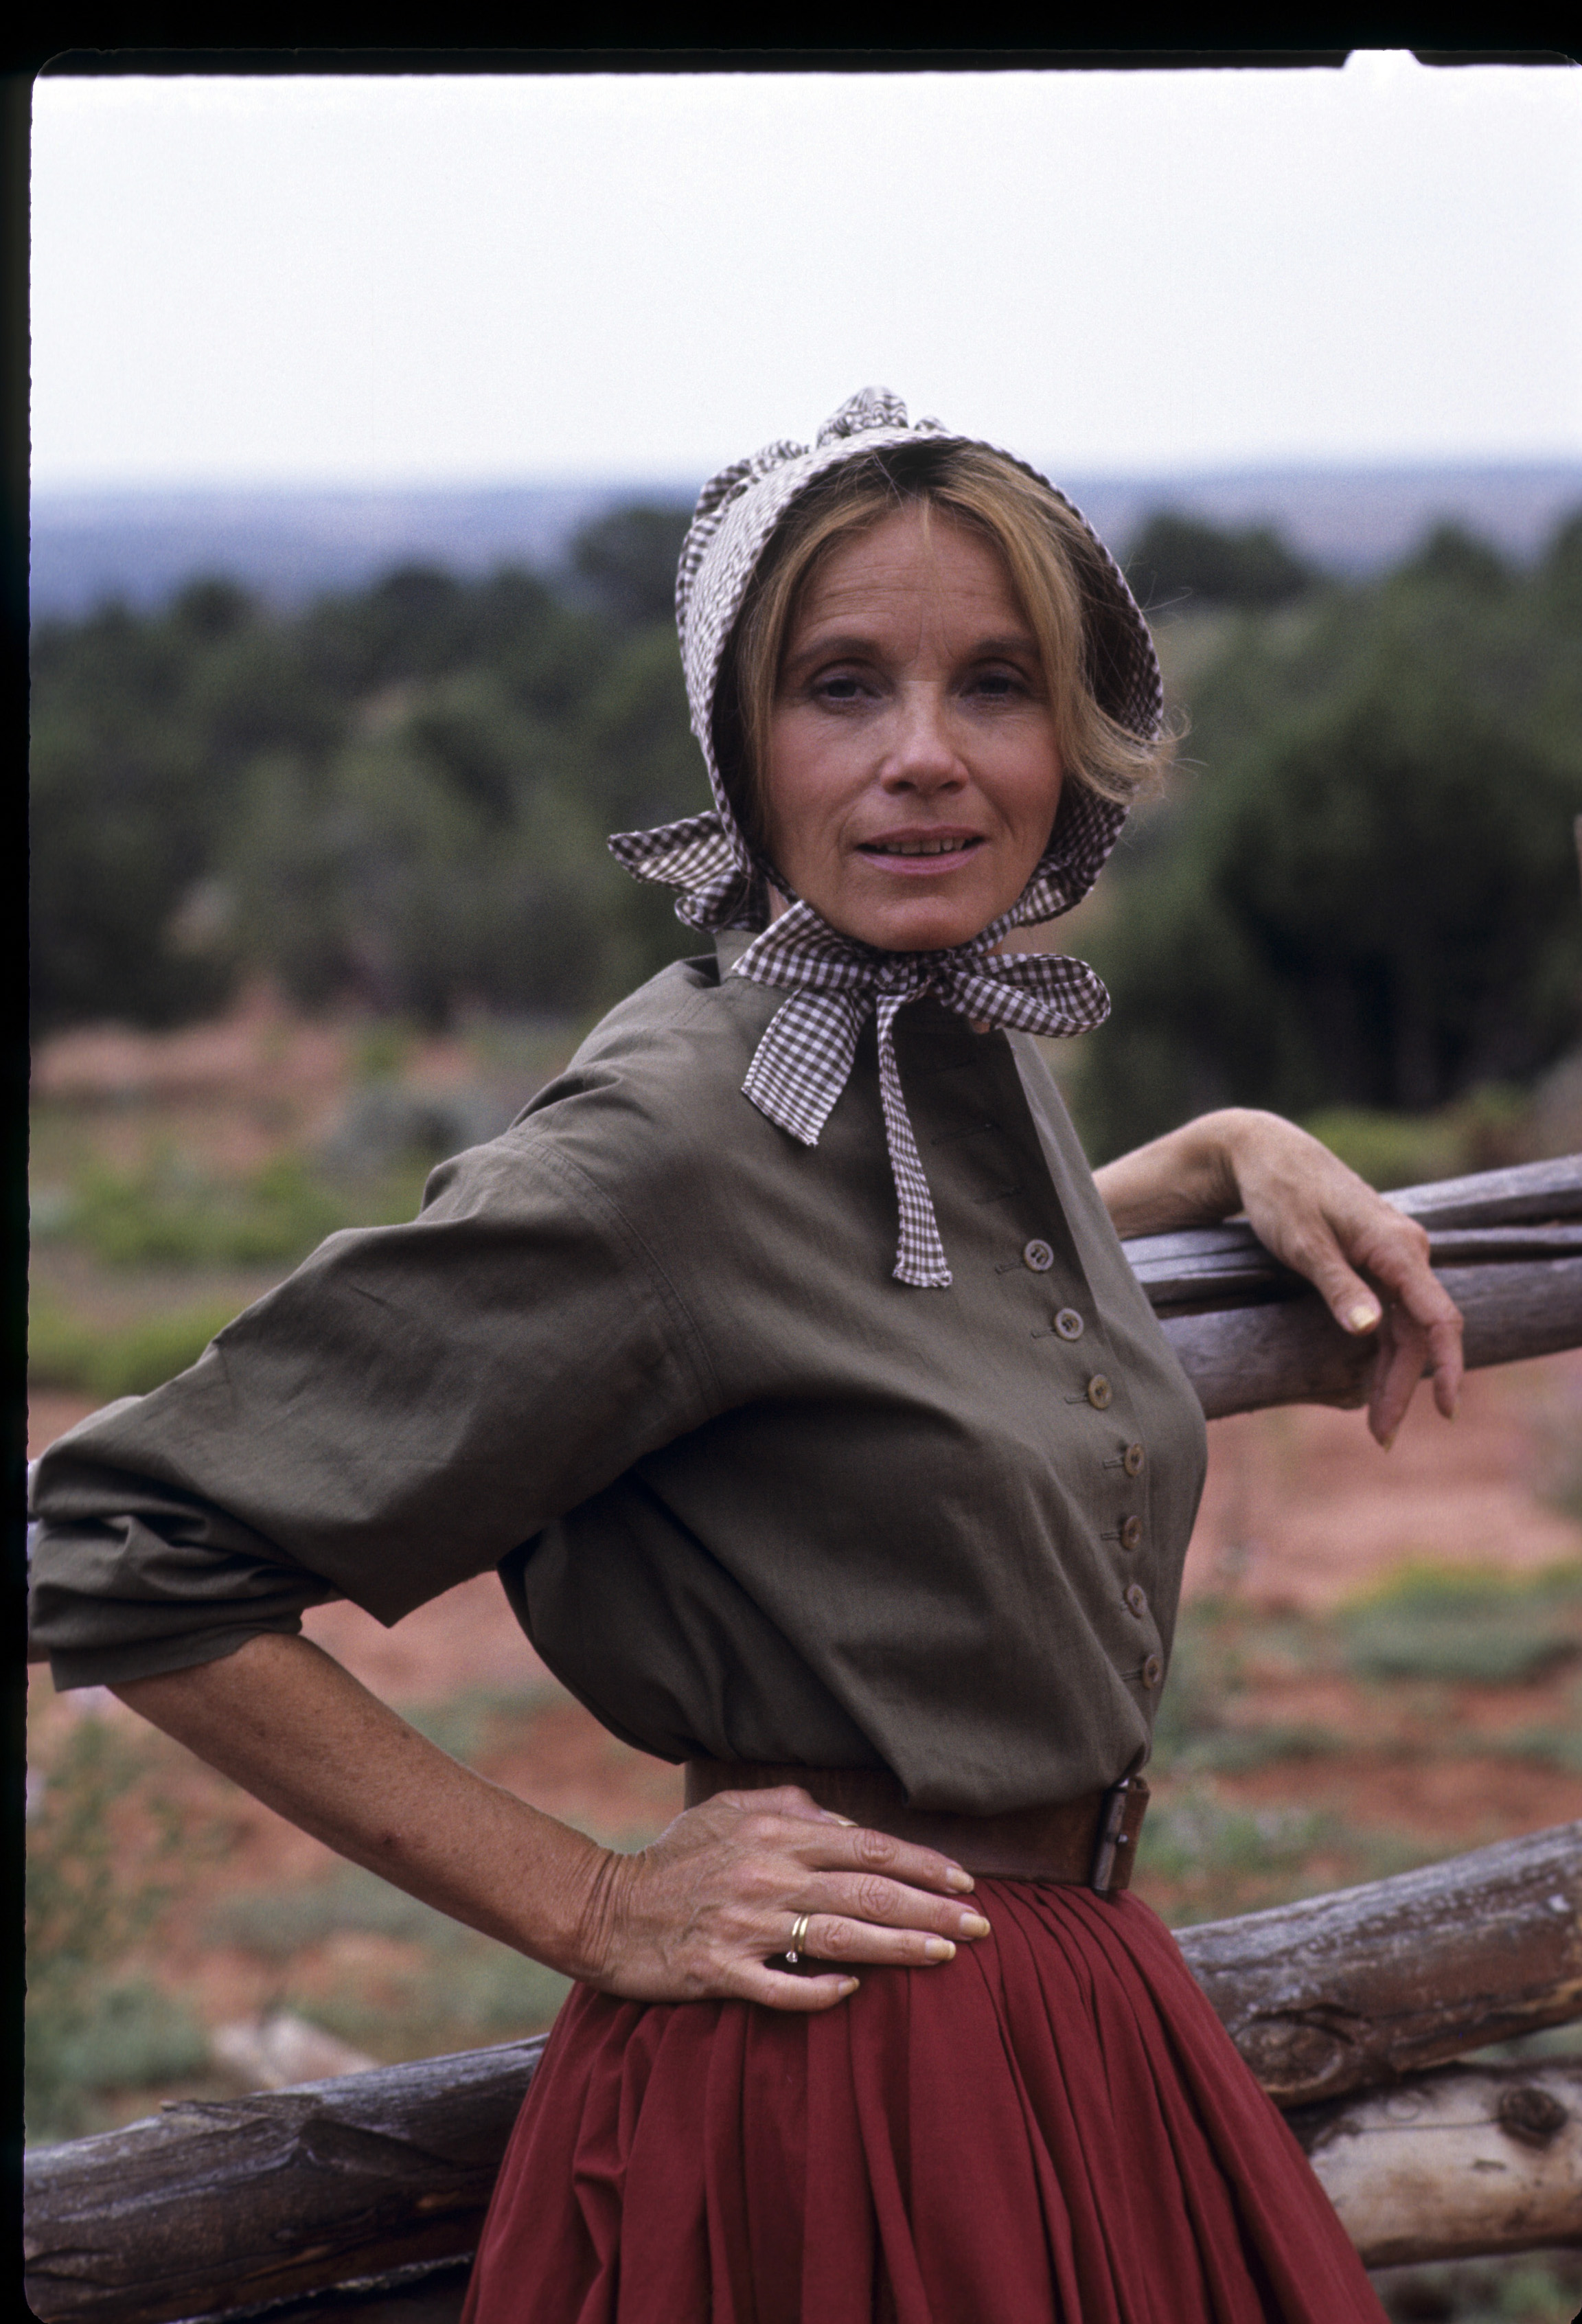 Eva Marie Saint while on the set of "The Macahans" in 1976 | Source: Getty Images